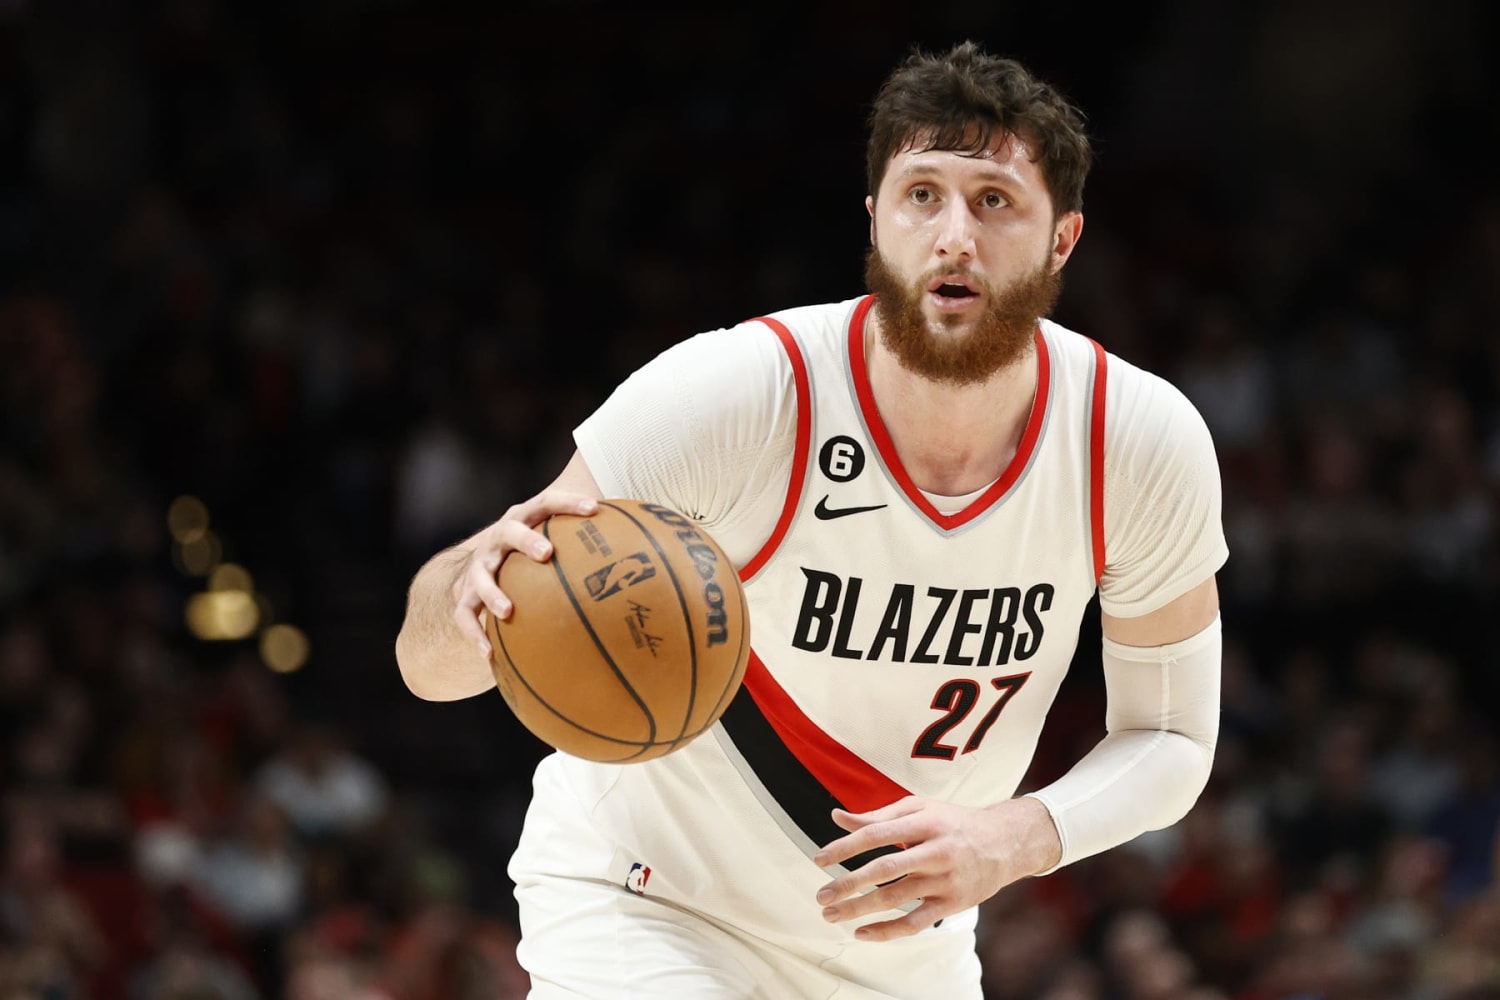 Blazers center Jusuf Nurkic out at least 4 weeks with left foot injury